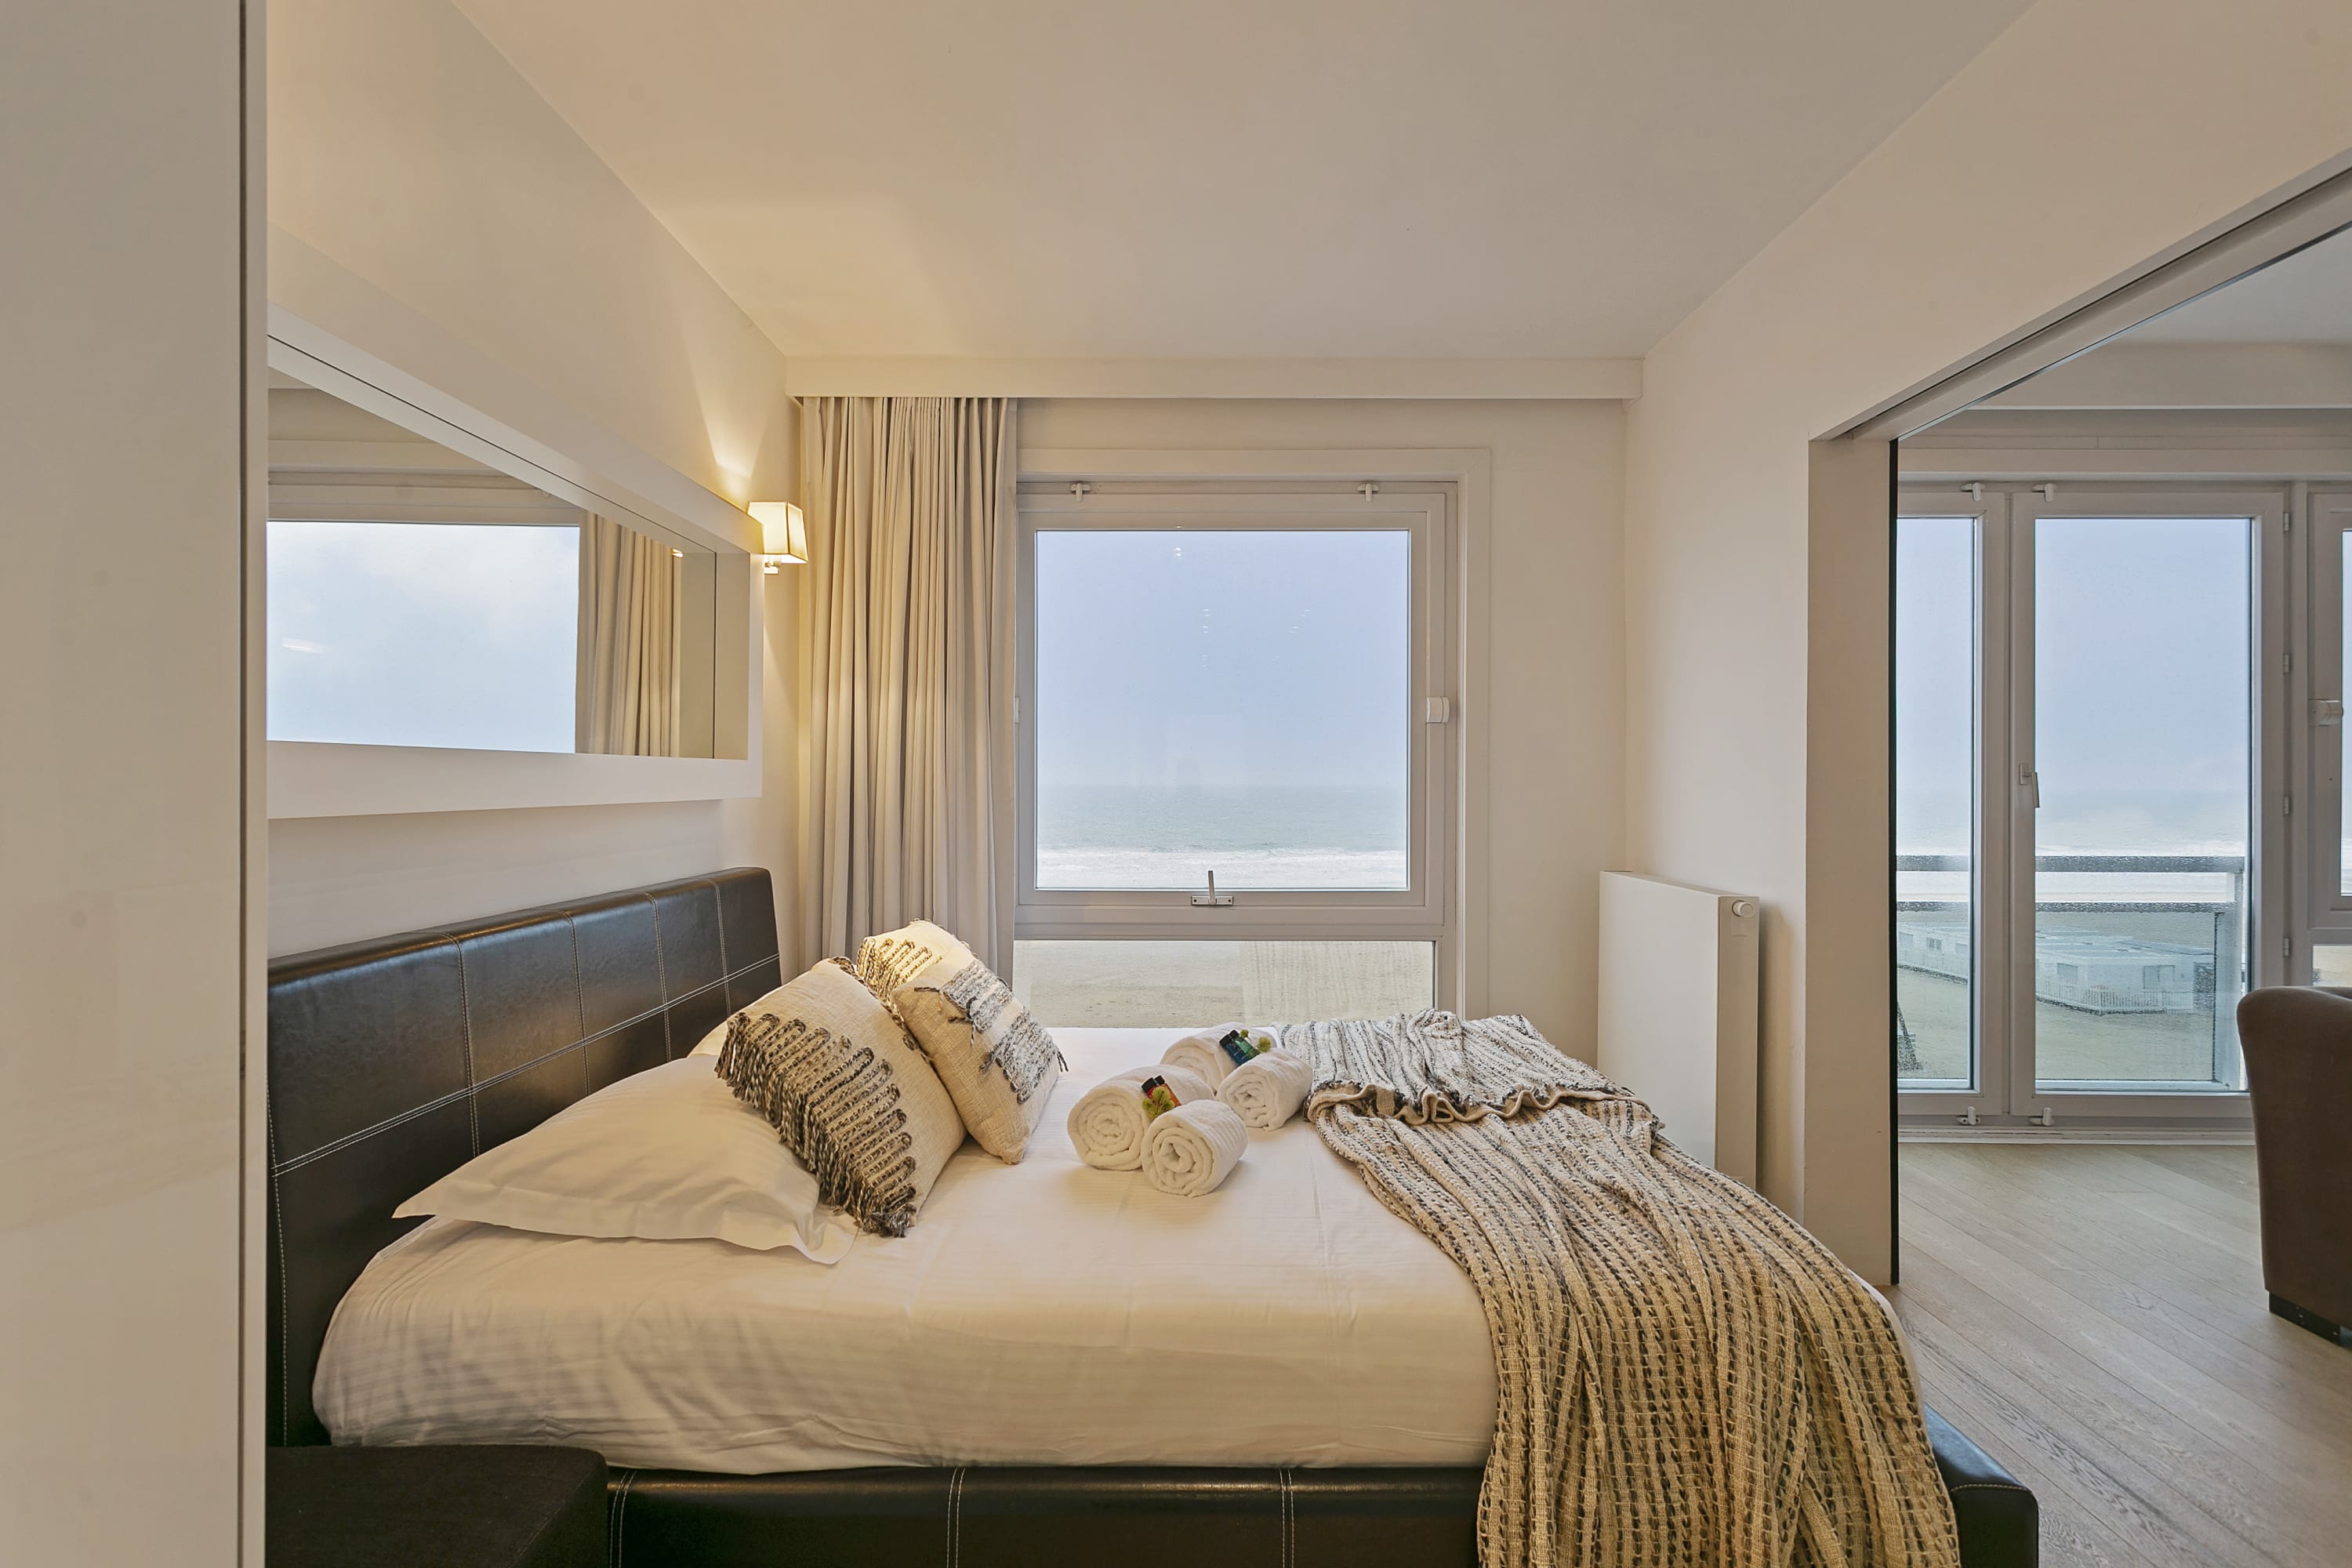 Property Image 2 - Cozy apartment with sea-view in the heart of Knokke